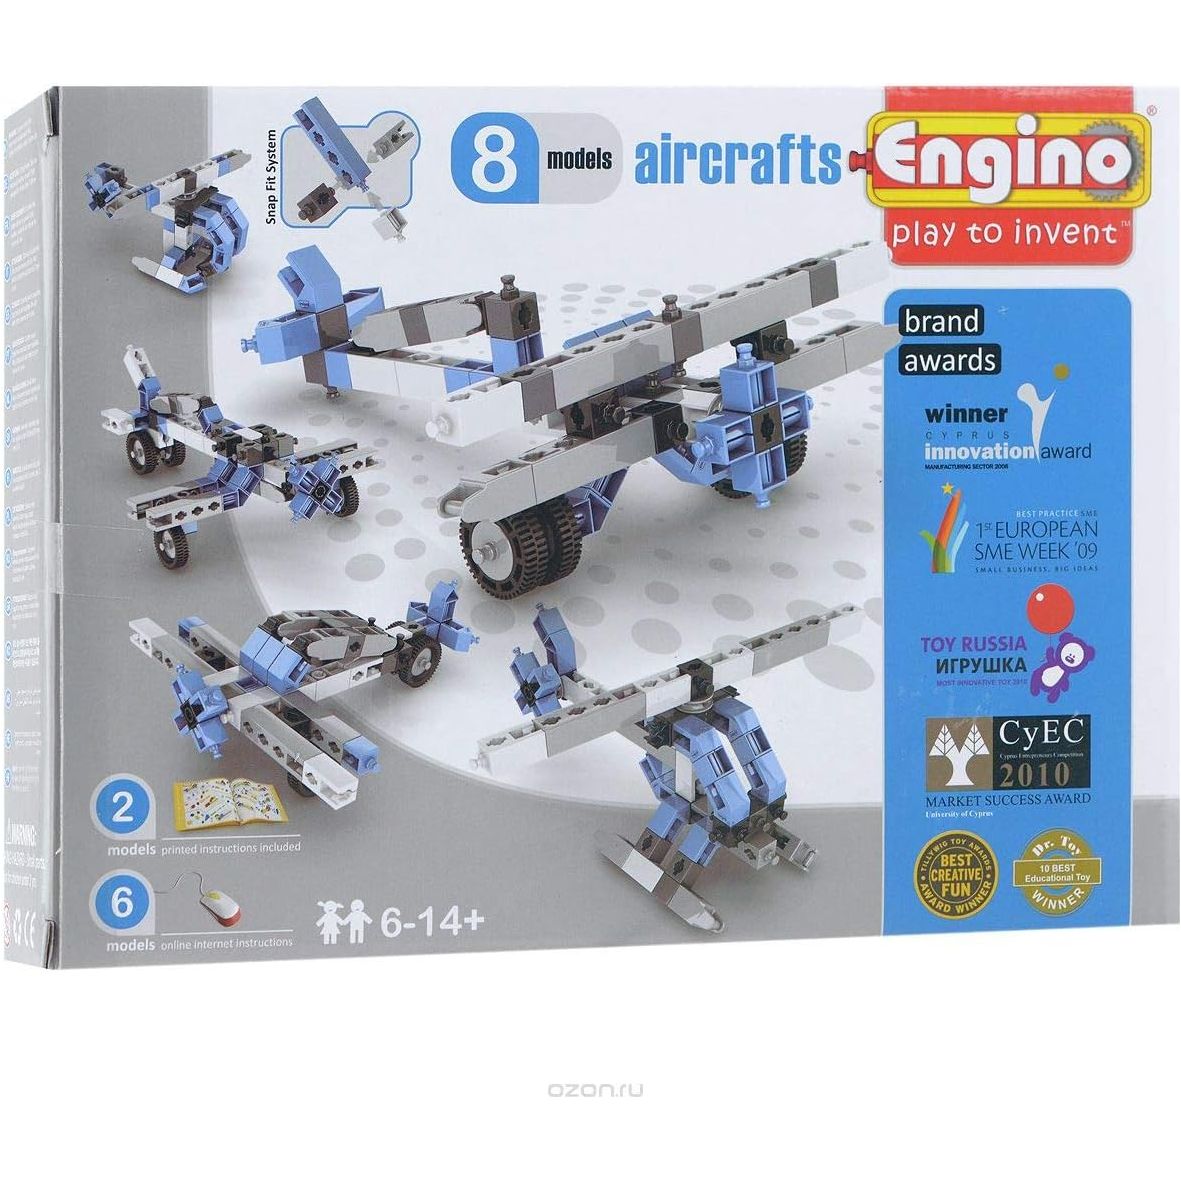 Engino Inventor Aircrafts 8 Models For Unisex - Sky Blue